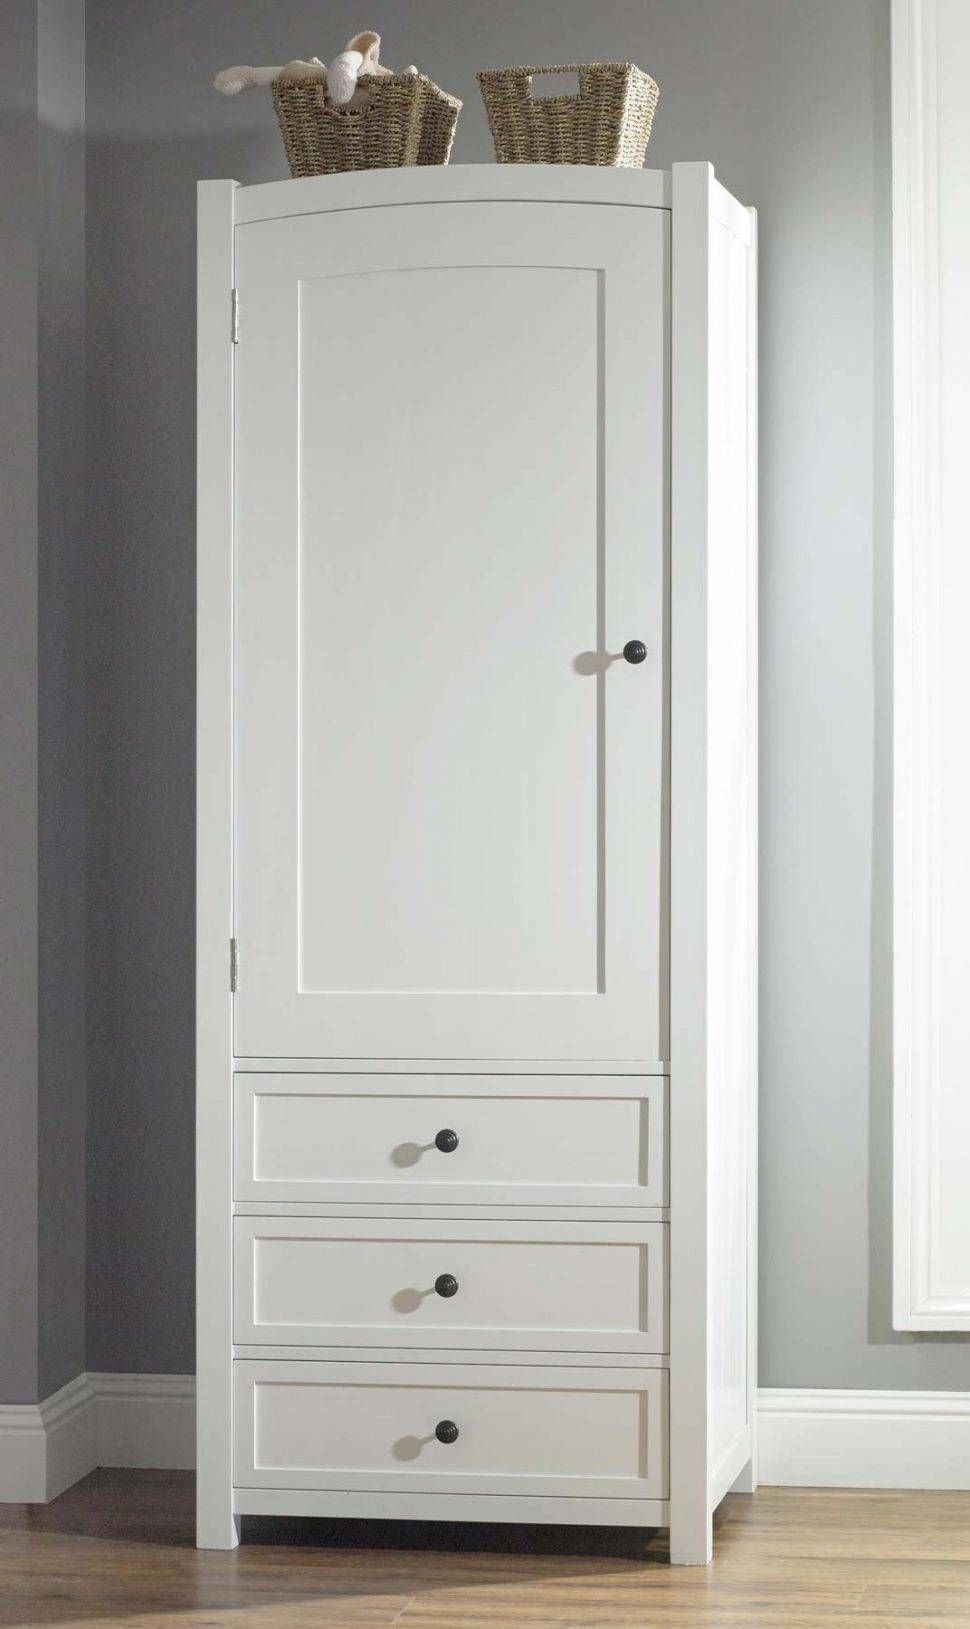 Wardrobe : 39 Formidable White Wooden Wardrobe With Drawers Photo Pertaining To Large White Wardrobes With Drawers (View 10 of 15)